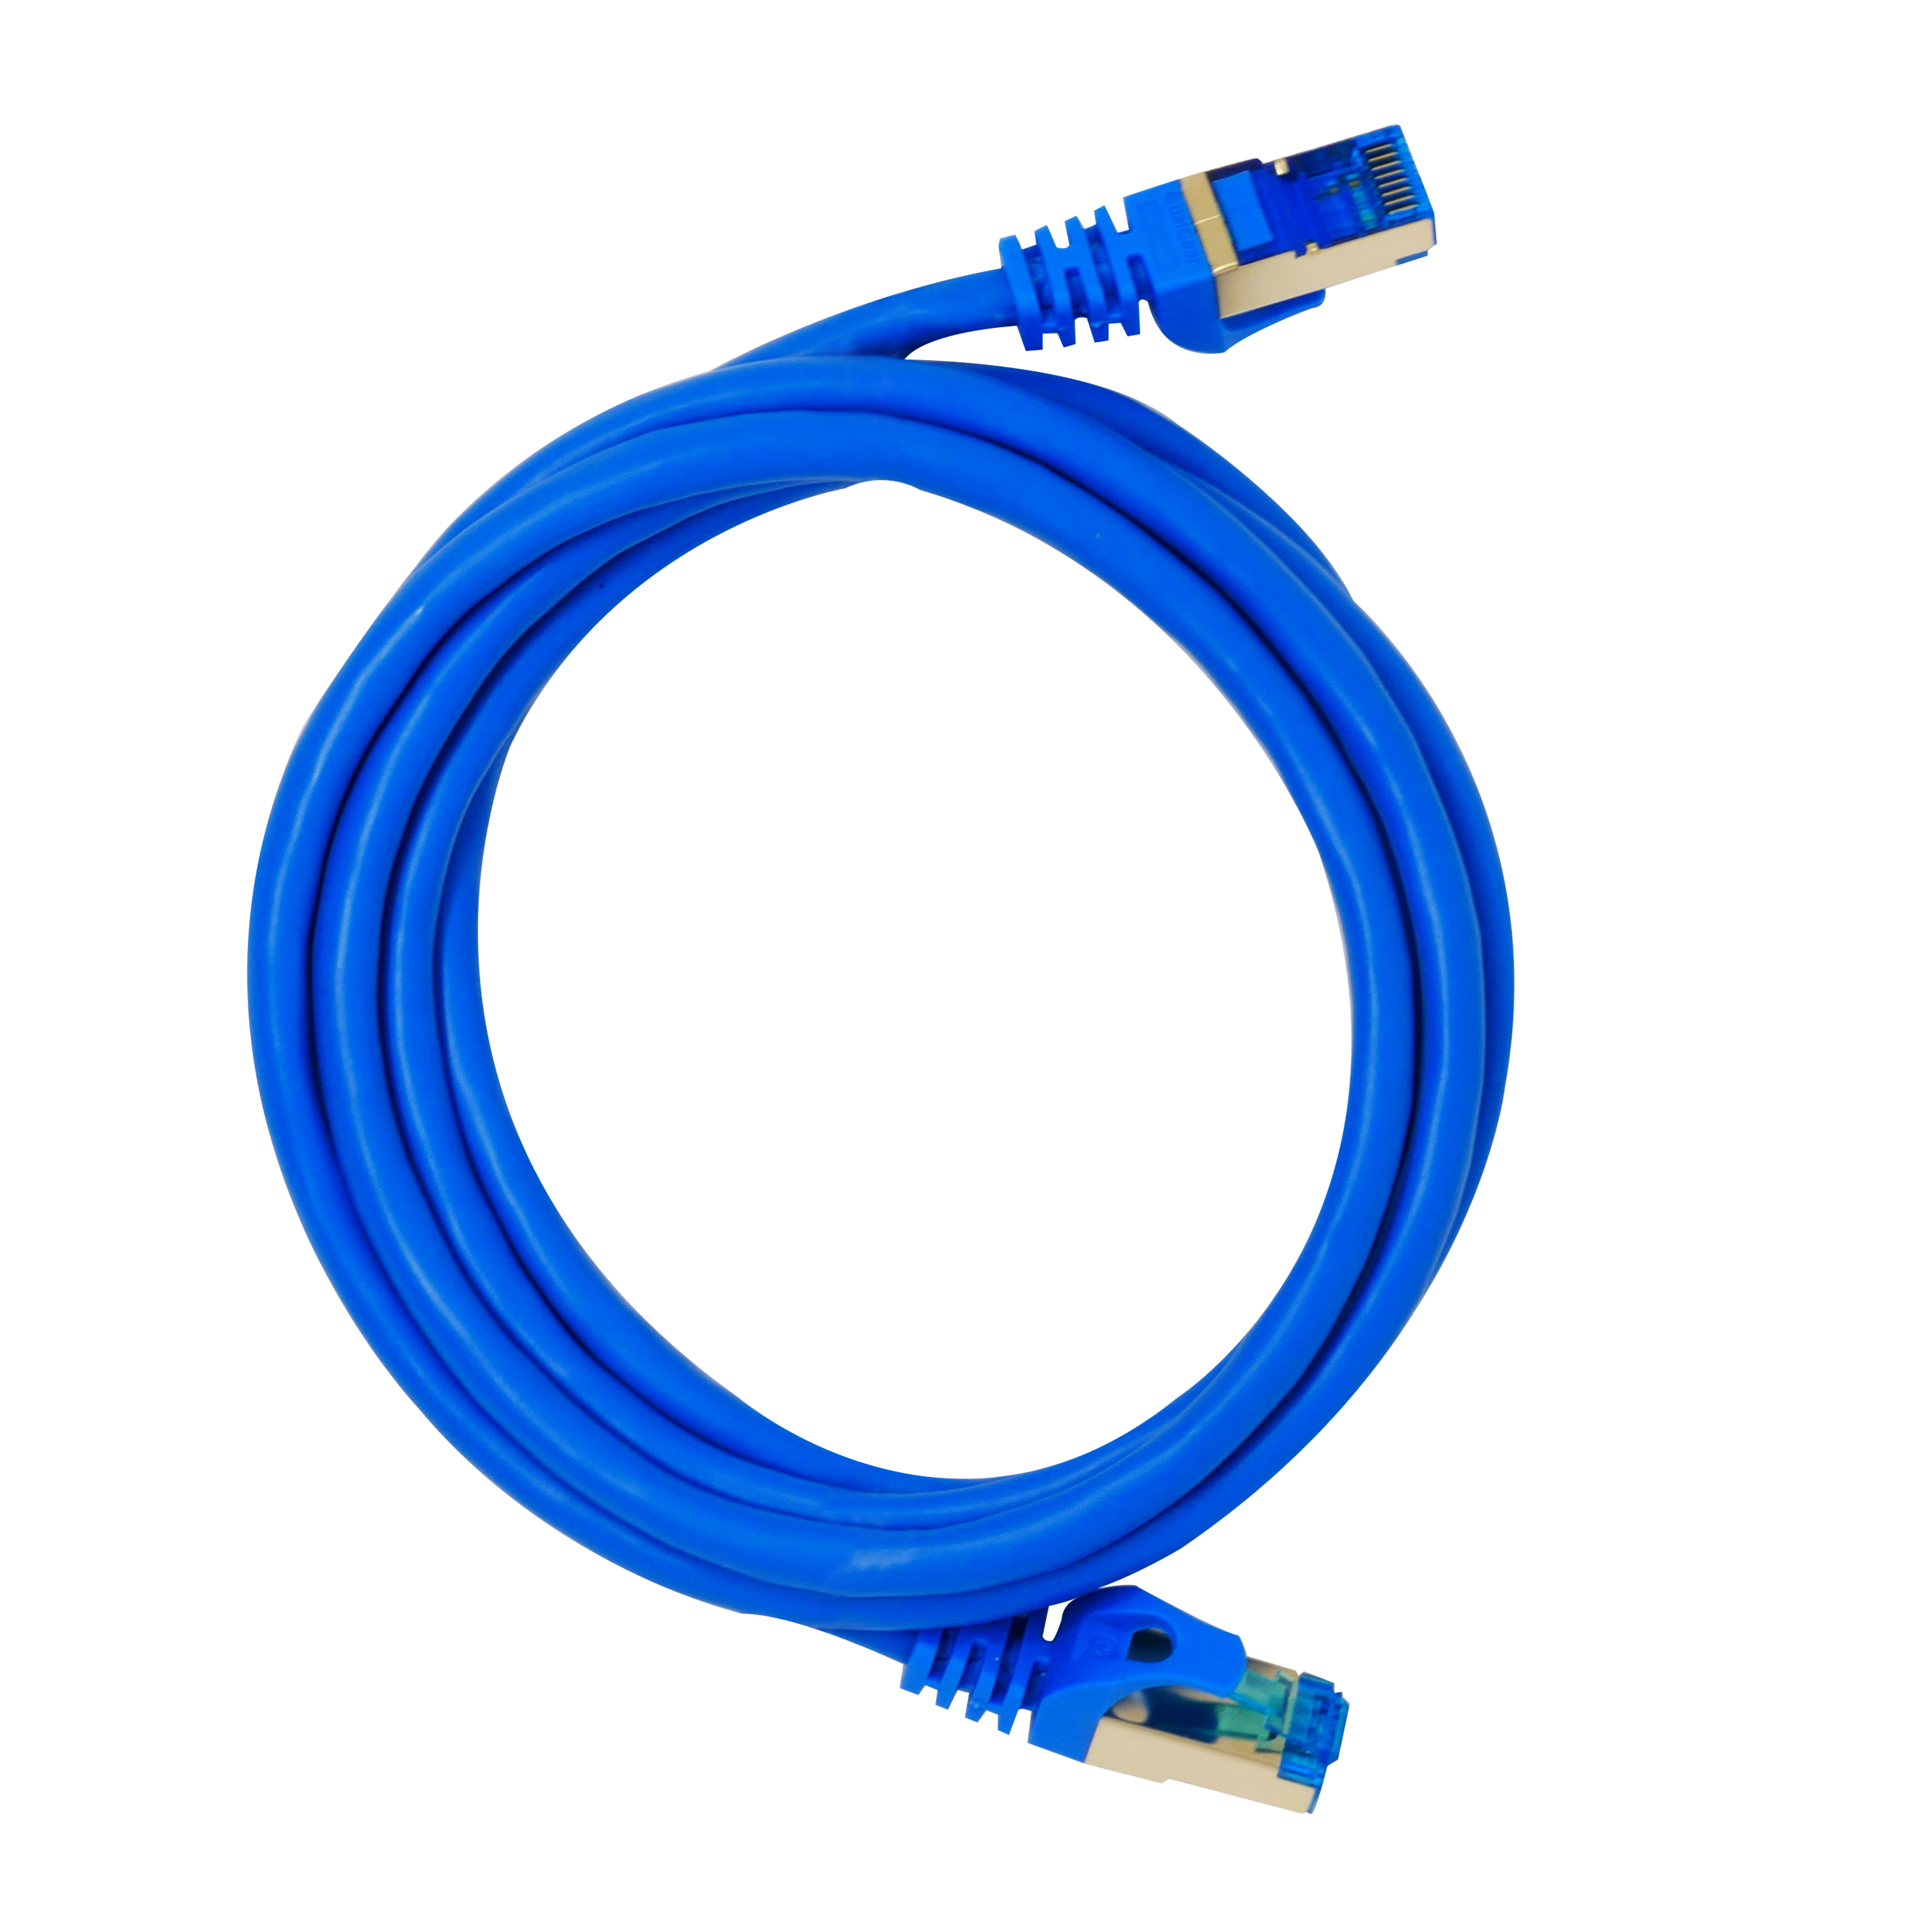 QualGear QG-CAT7R-6FT-BLU CAT 7 S/FTP Ethernet Cable Length 6 feet - 26 AWG, 10 Gbps, Gold Plated Contacts, RJ45, 99.99% OFC Copper, Color Blue 